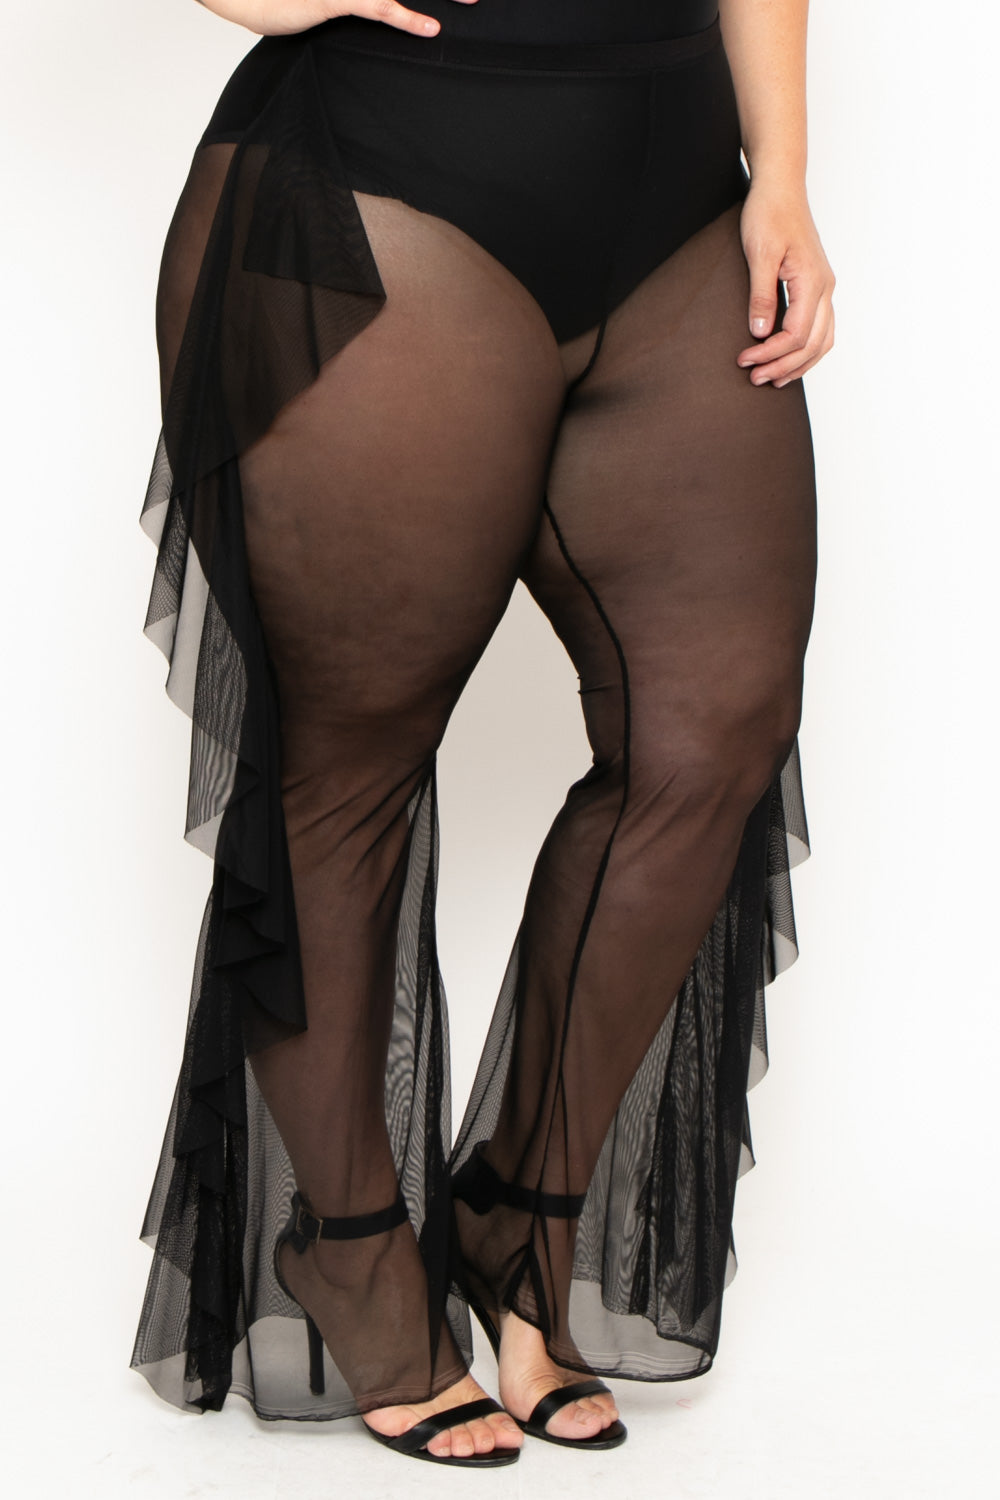 Plus Size Women'S Mesh Lining See-Through Double Layer Ruffle Sexy